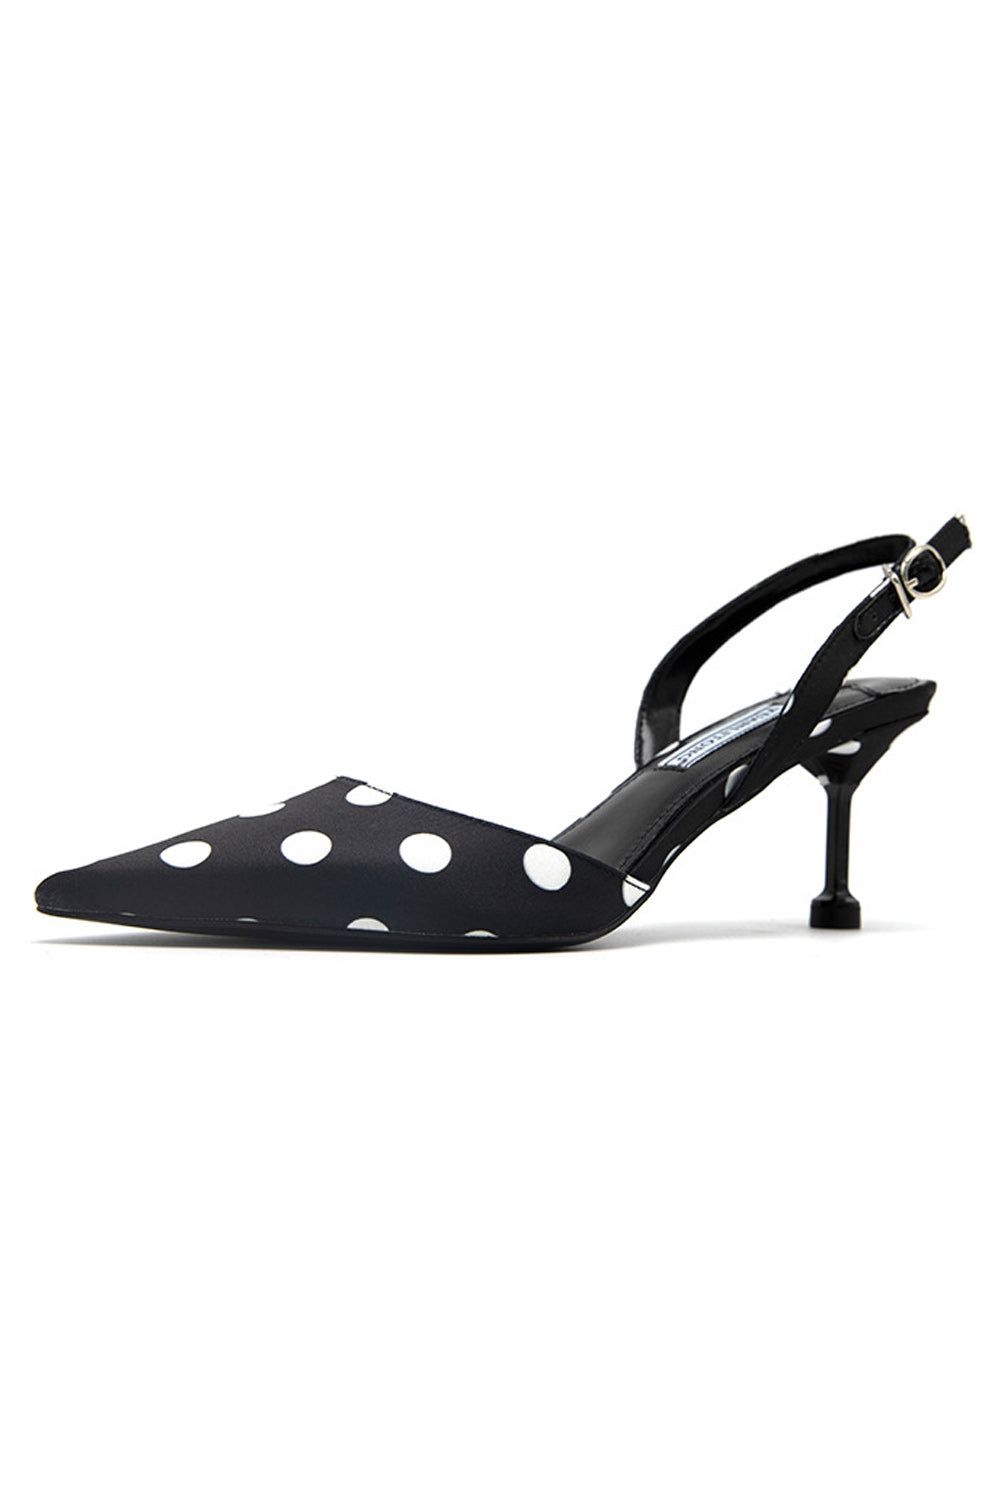 Women Pretty Polka Dotted Pointed Toe Comfy Heel Sandals - WSHP76318